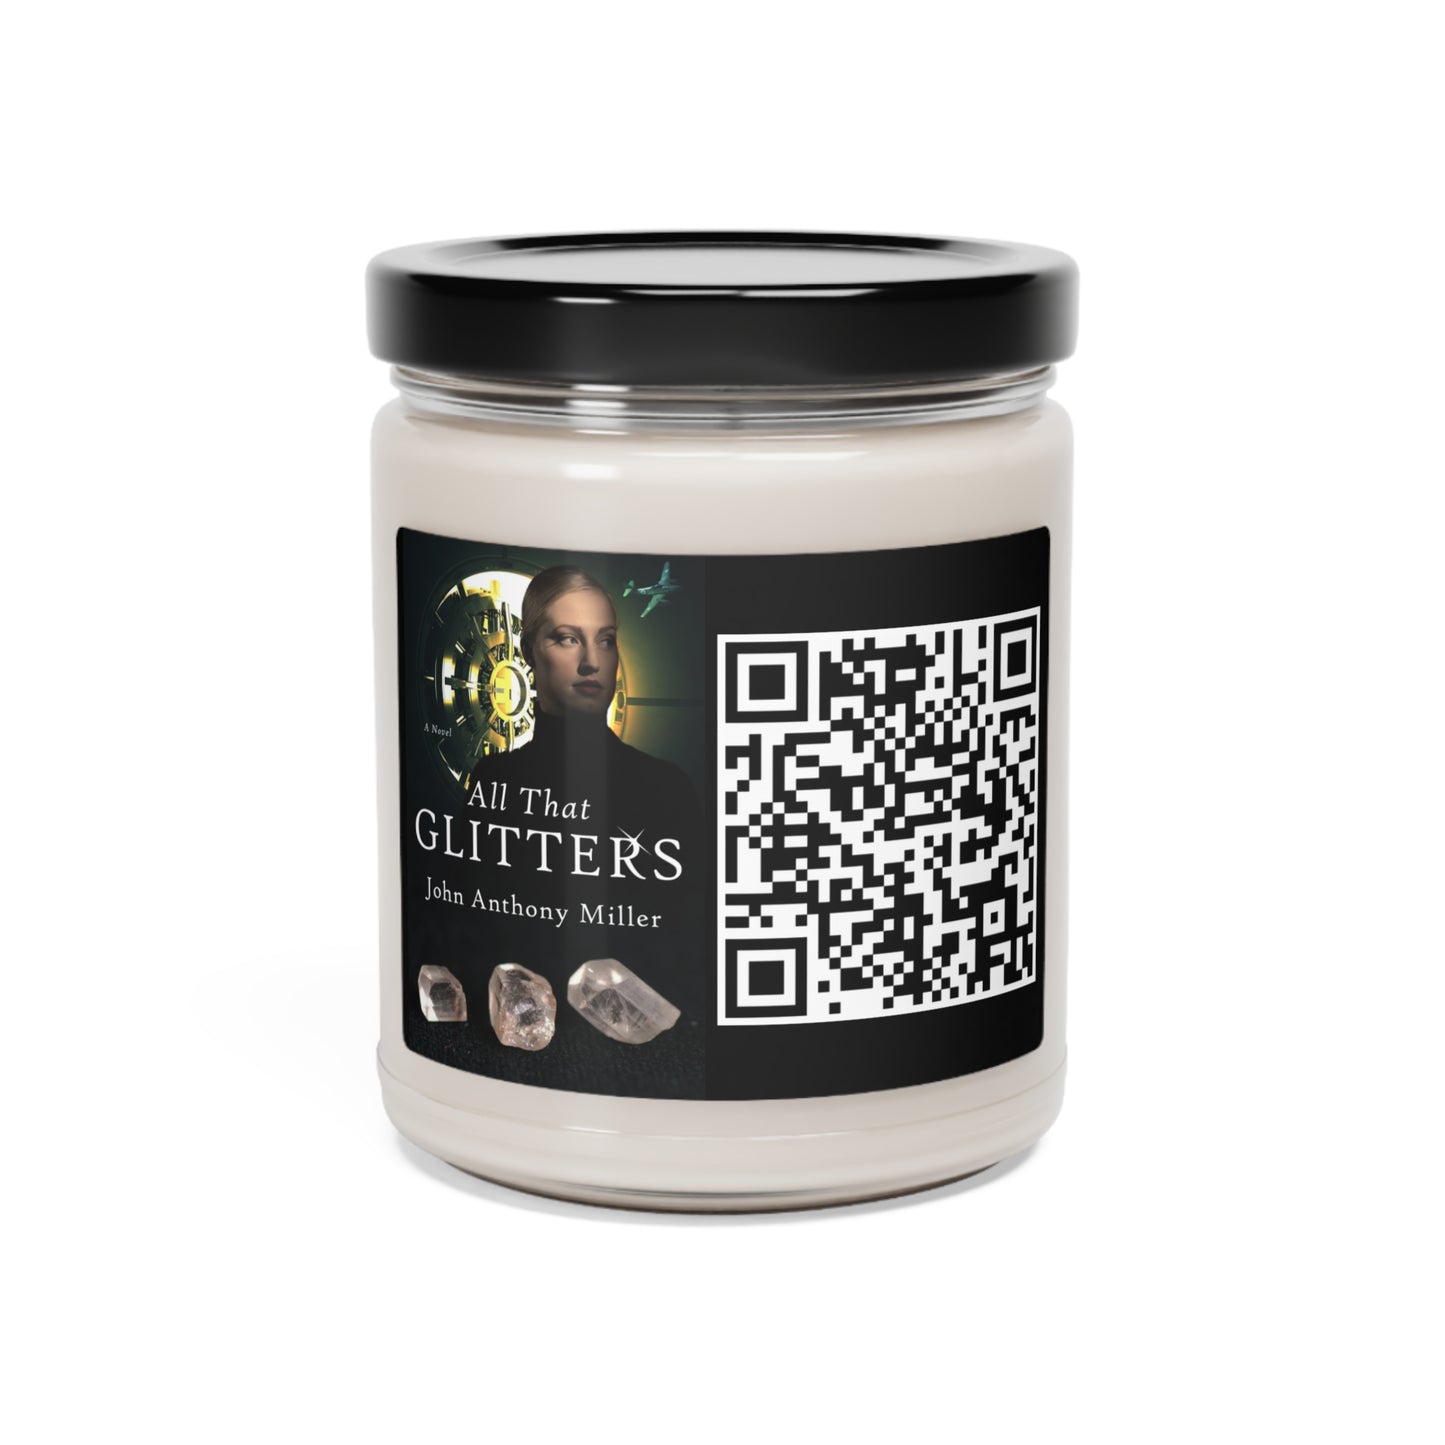 All That Glitters - Scented Soy Candle